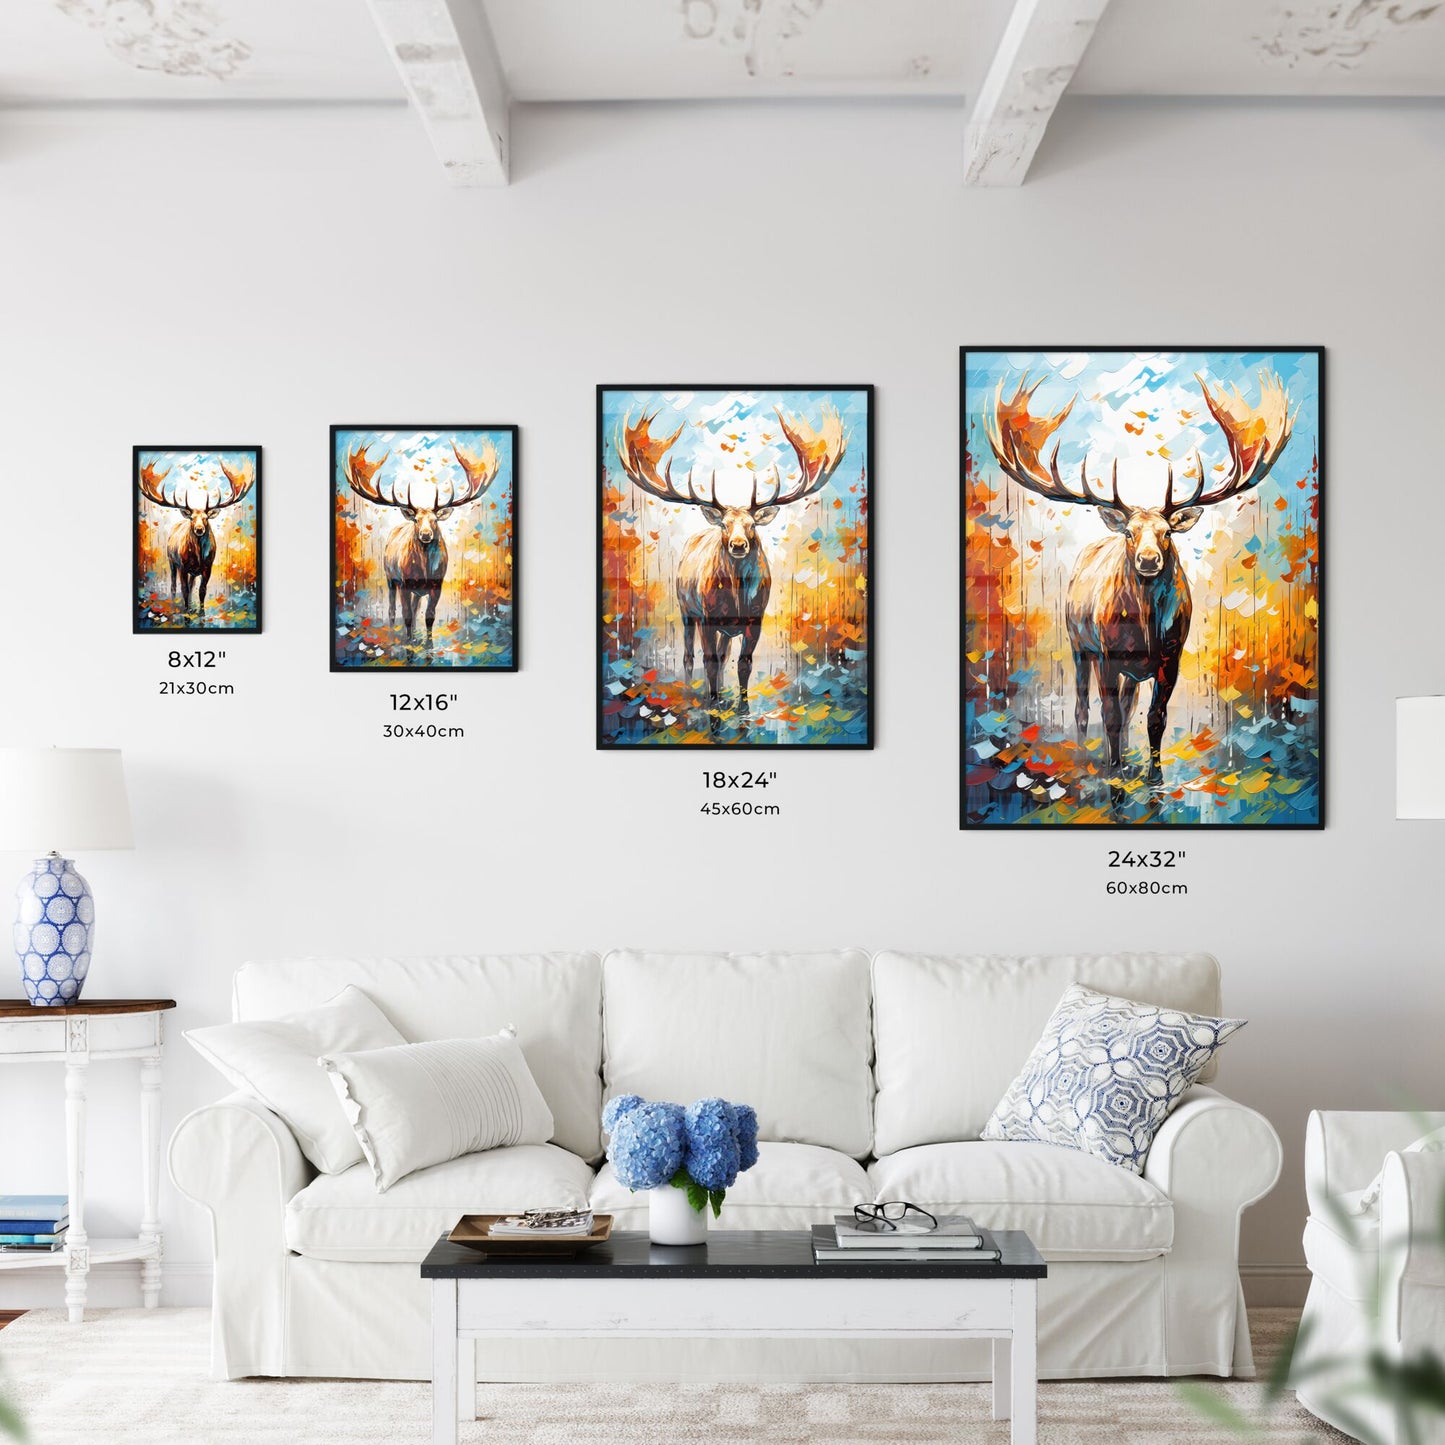 Silhouette Moose On White Background - A Painting Of A Moose With Large Antlers Default Title